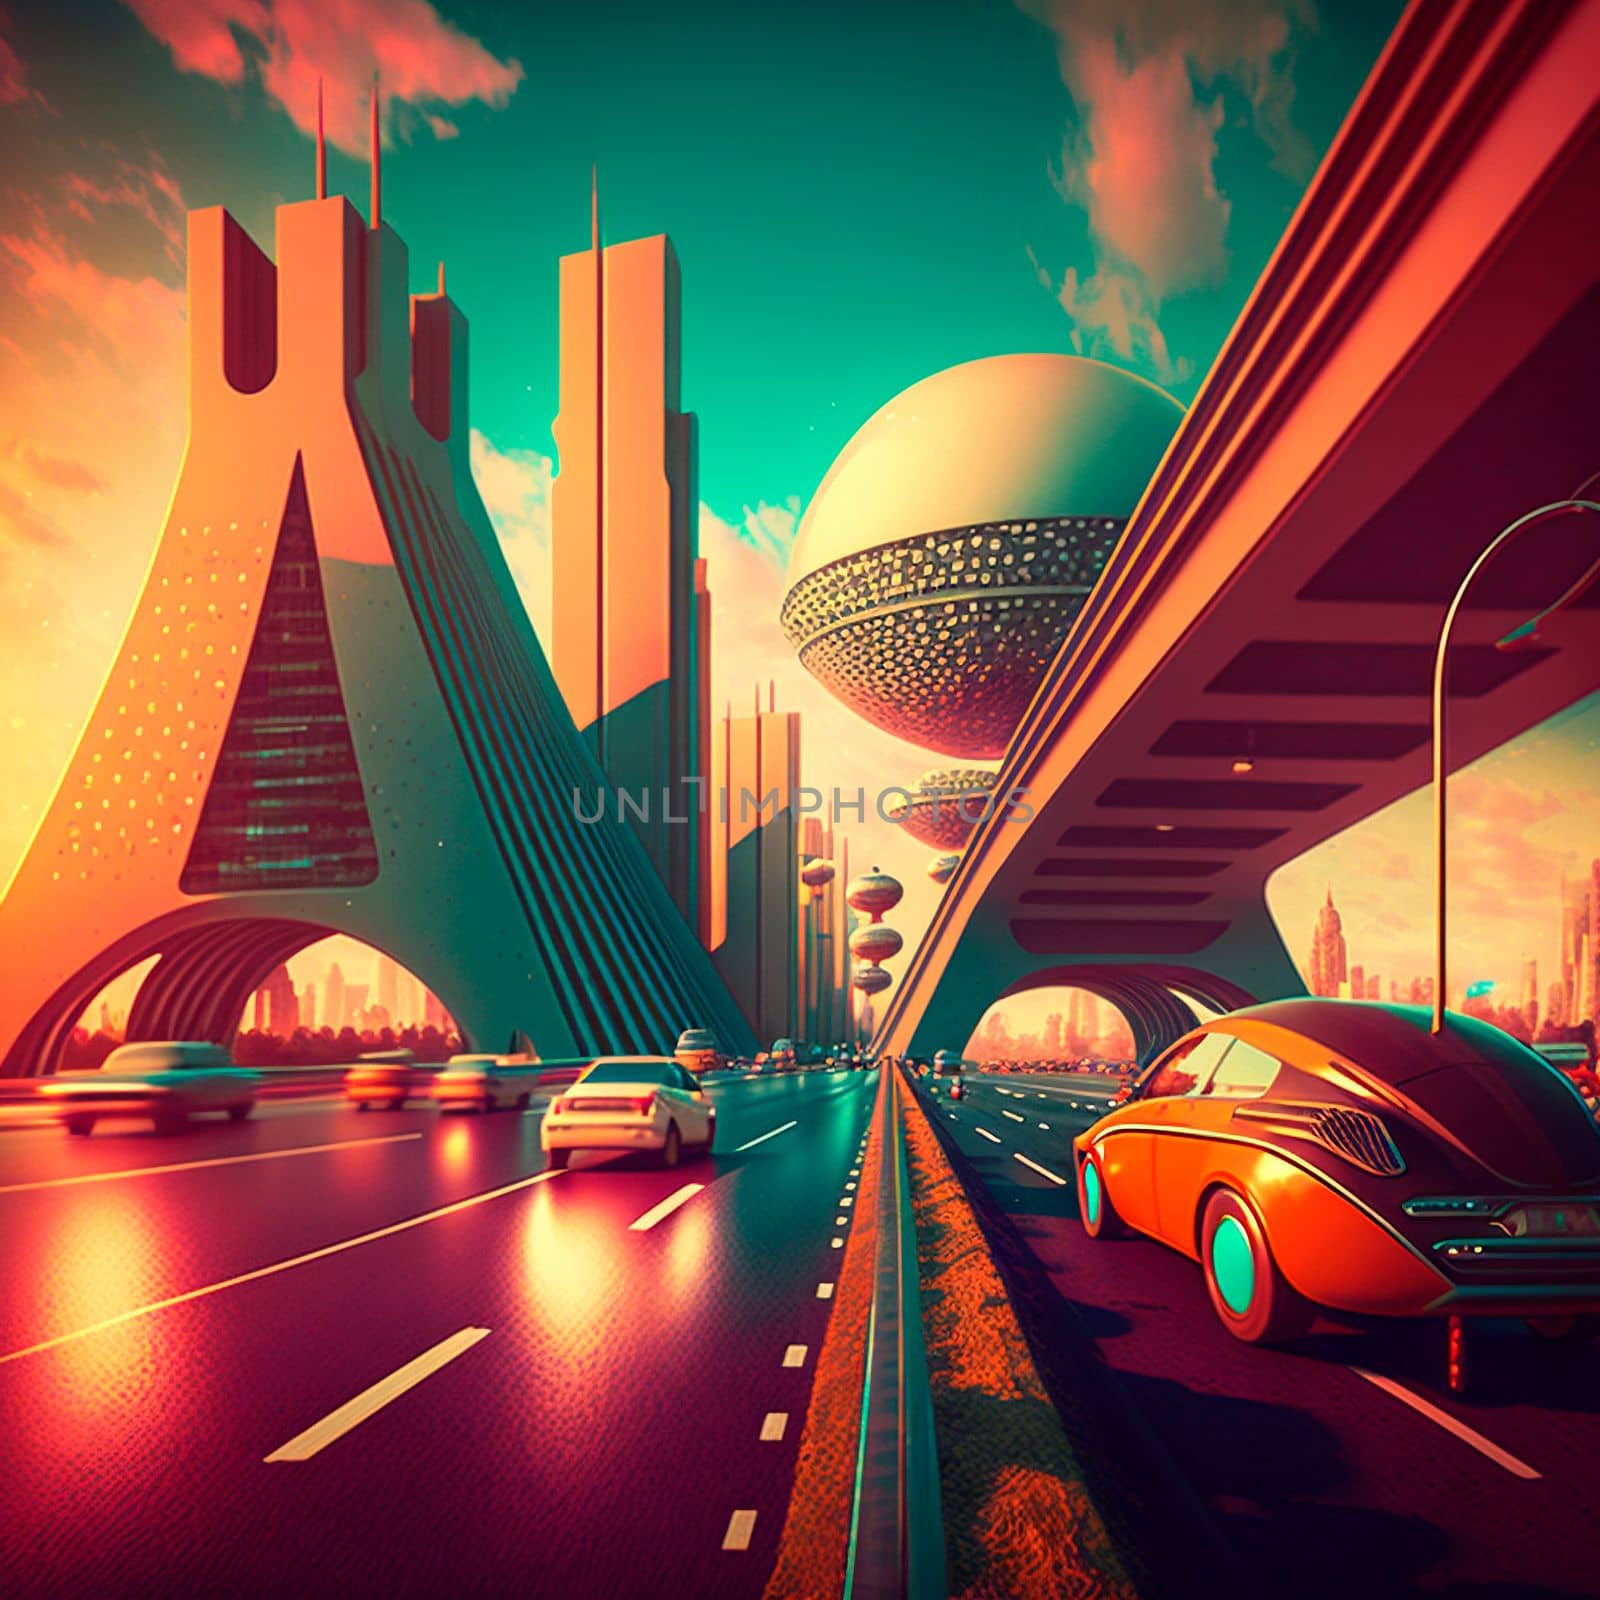 Futuristic city in retro style. Cars are driving on the highway. High quality illustration